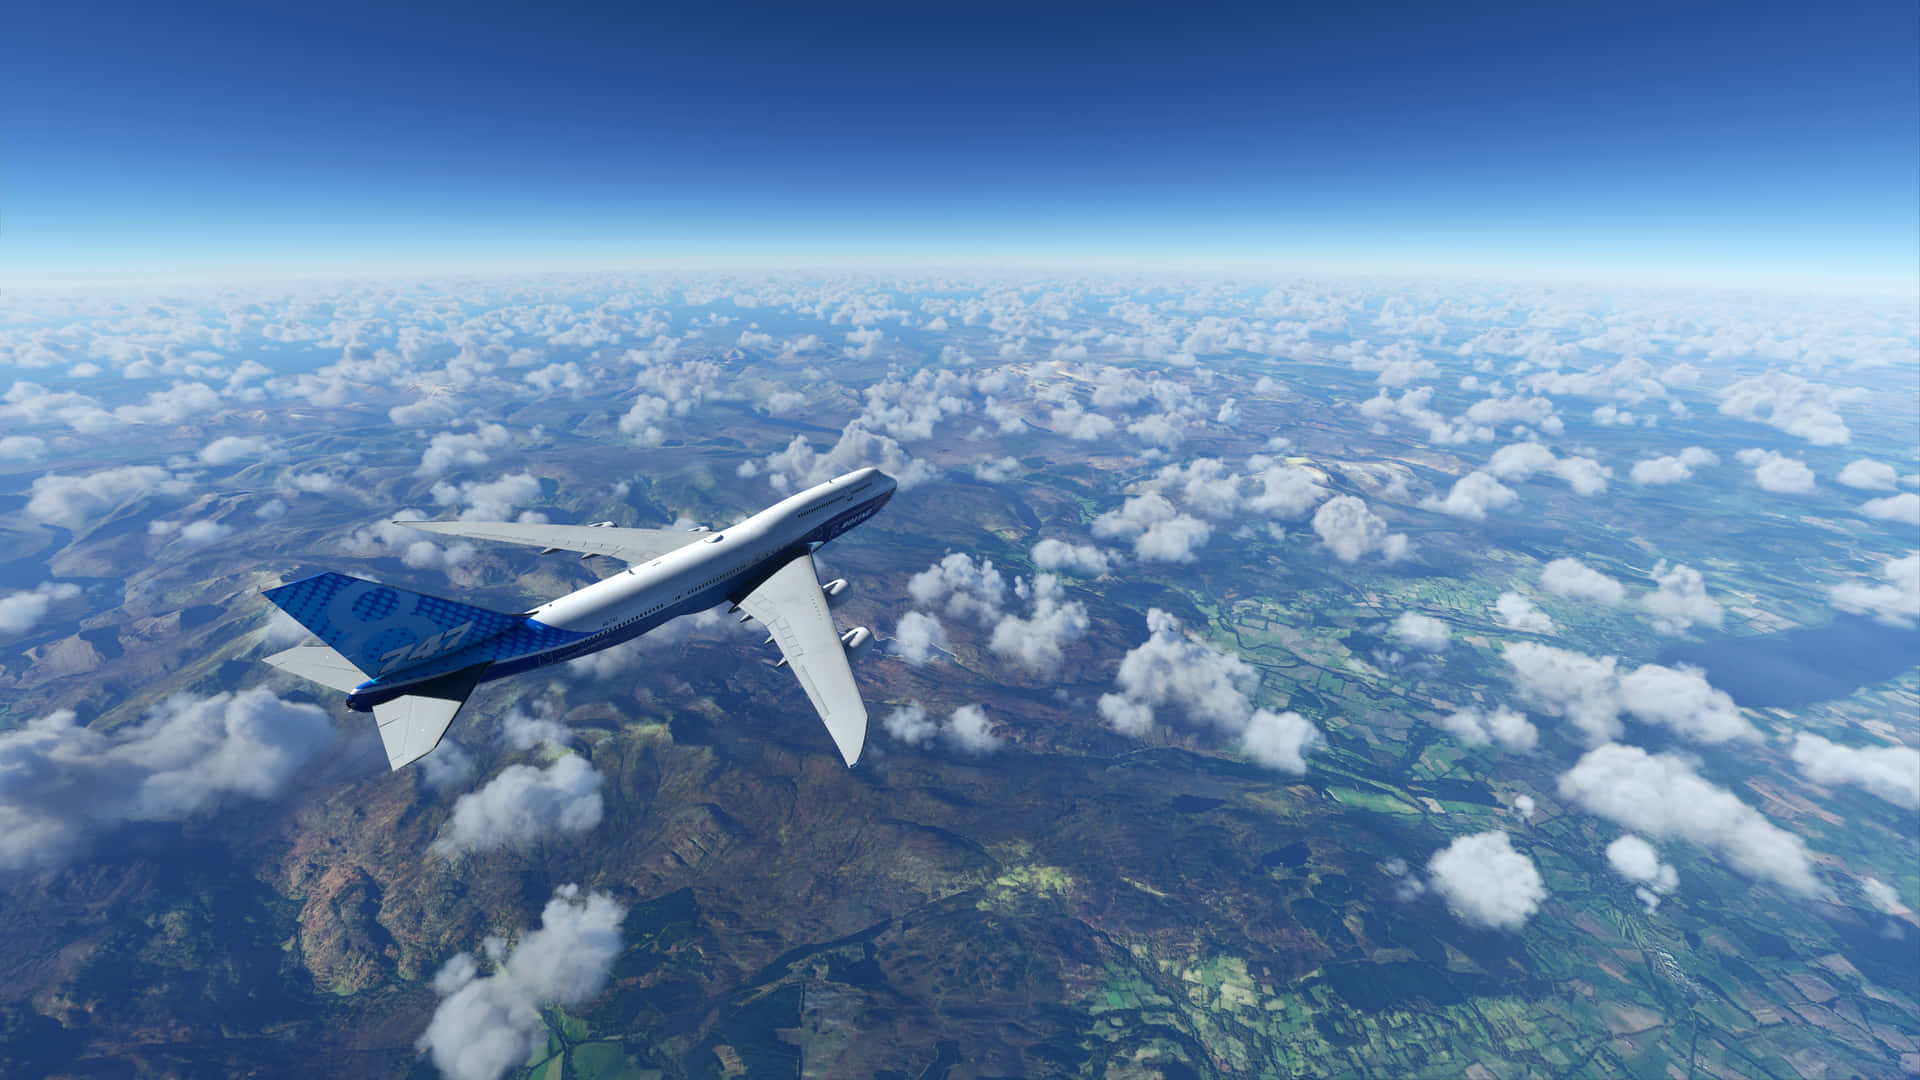 4k Microsoft Flight Simulator Background Airplane Flying Over Clouds